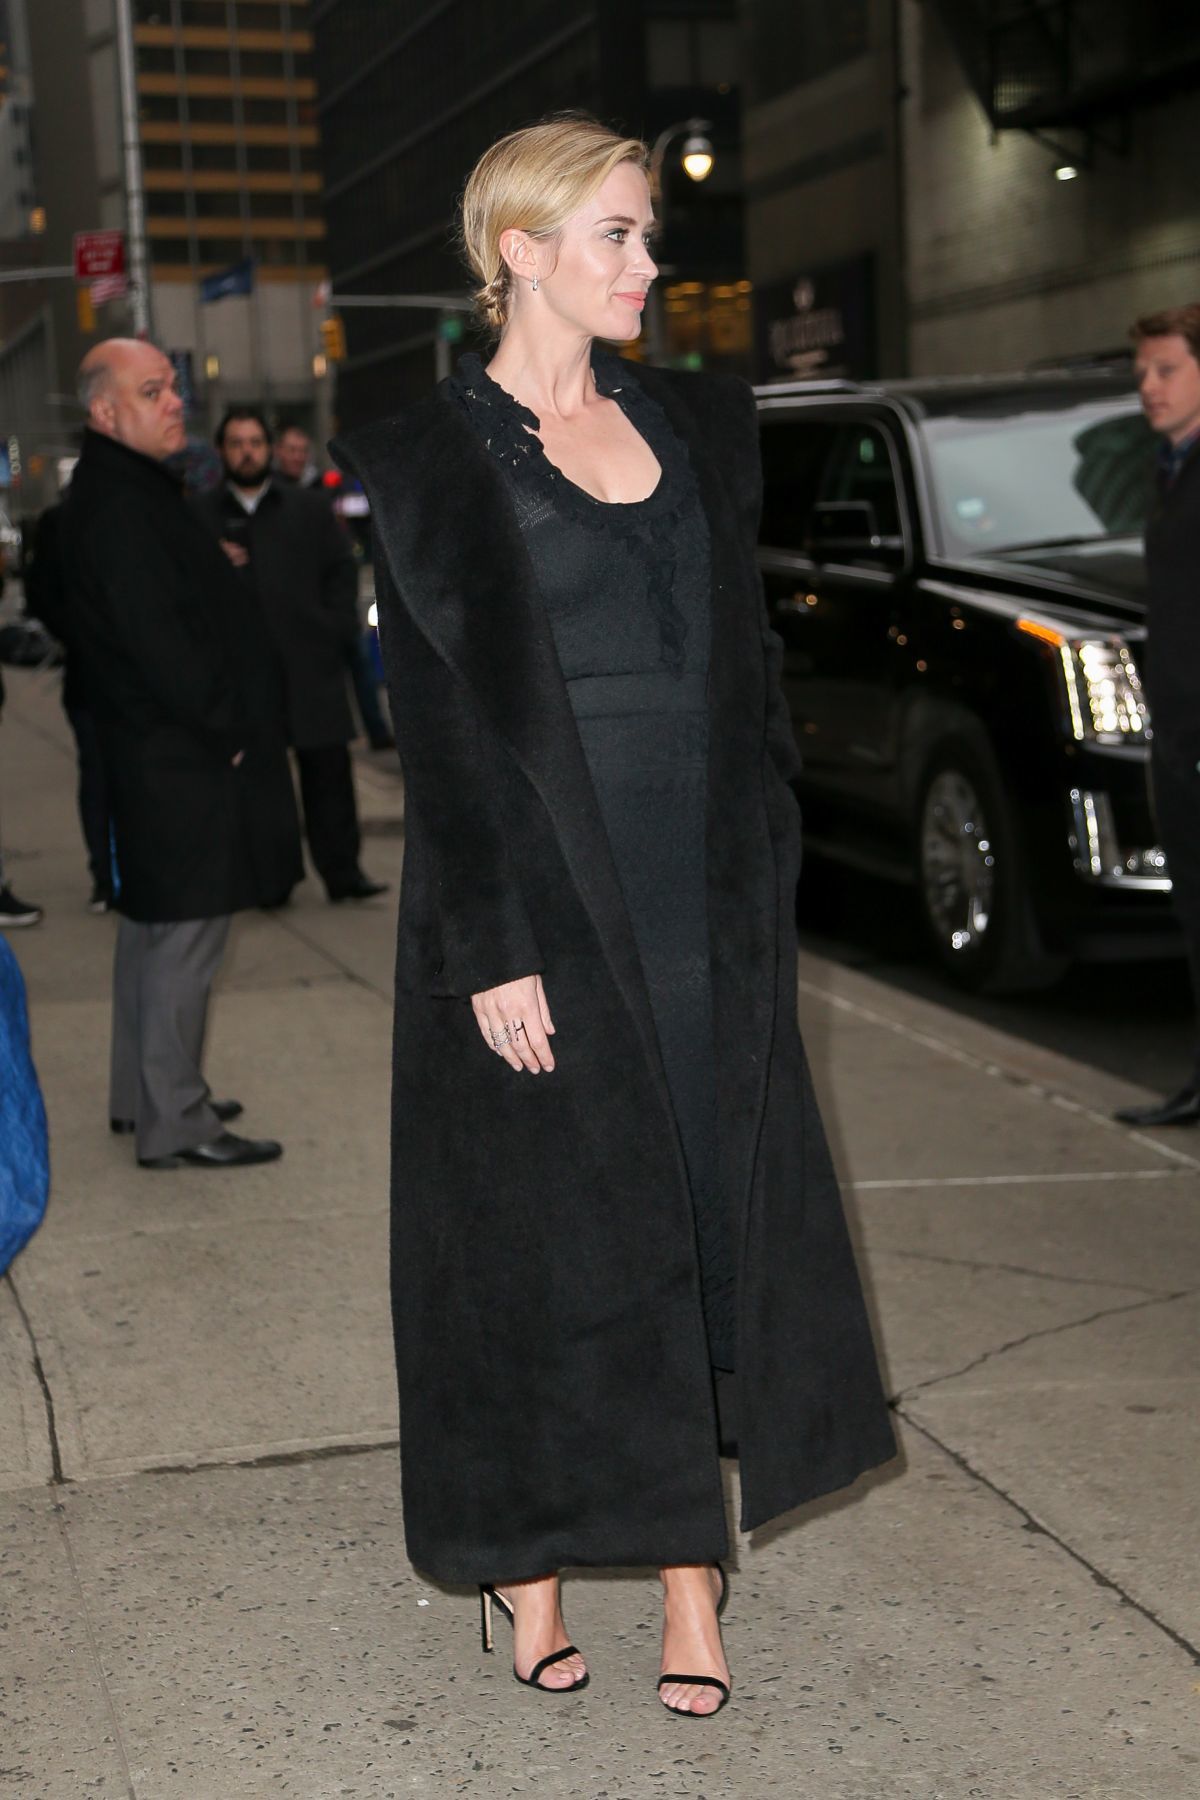 emily-blunt-arriving-at-the-late-show-with-stephen-colbert-in-nyc-32918-3.jpeg